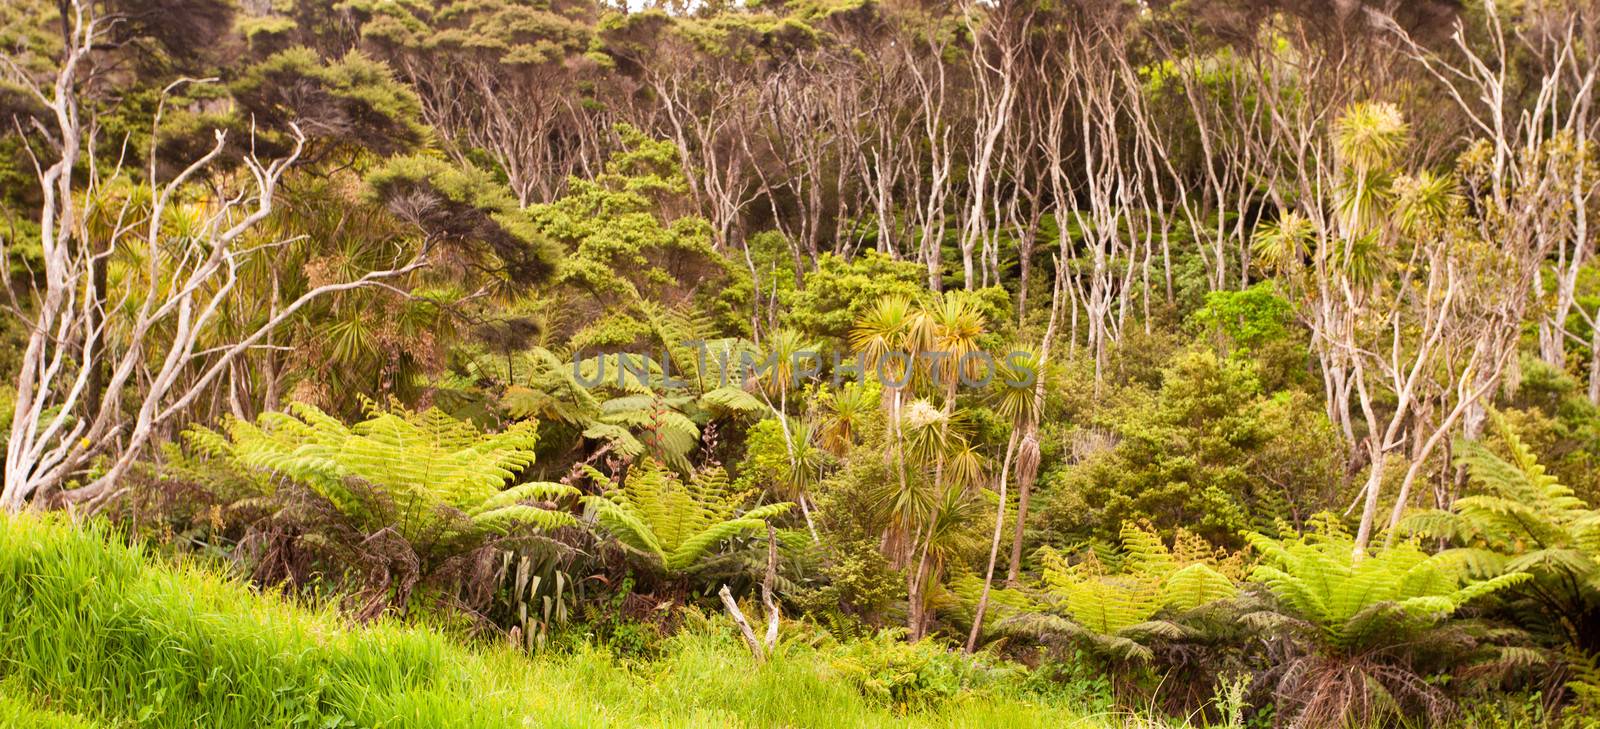 New Zealand forest of fern trees and manuka trees by PiLens